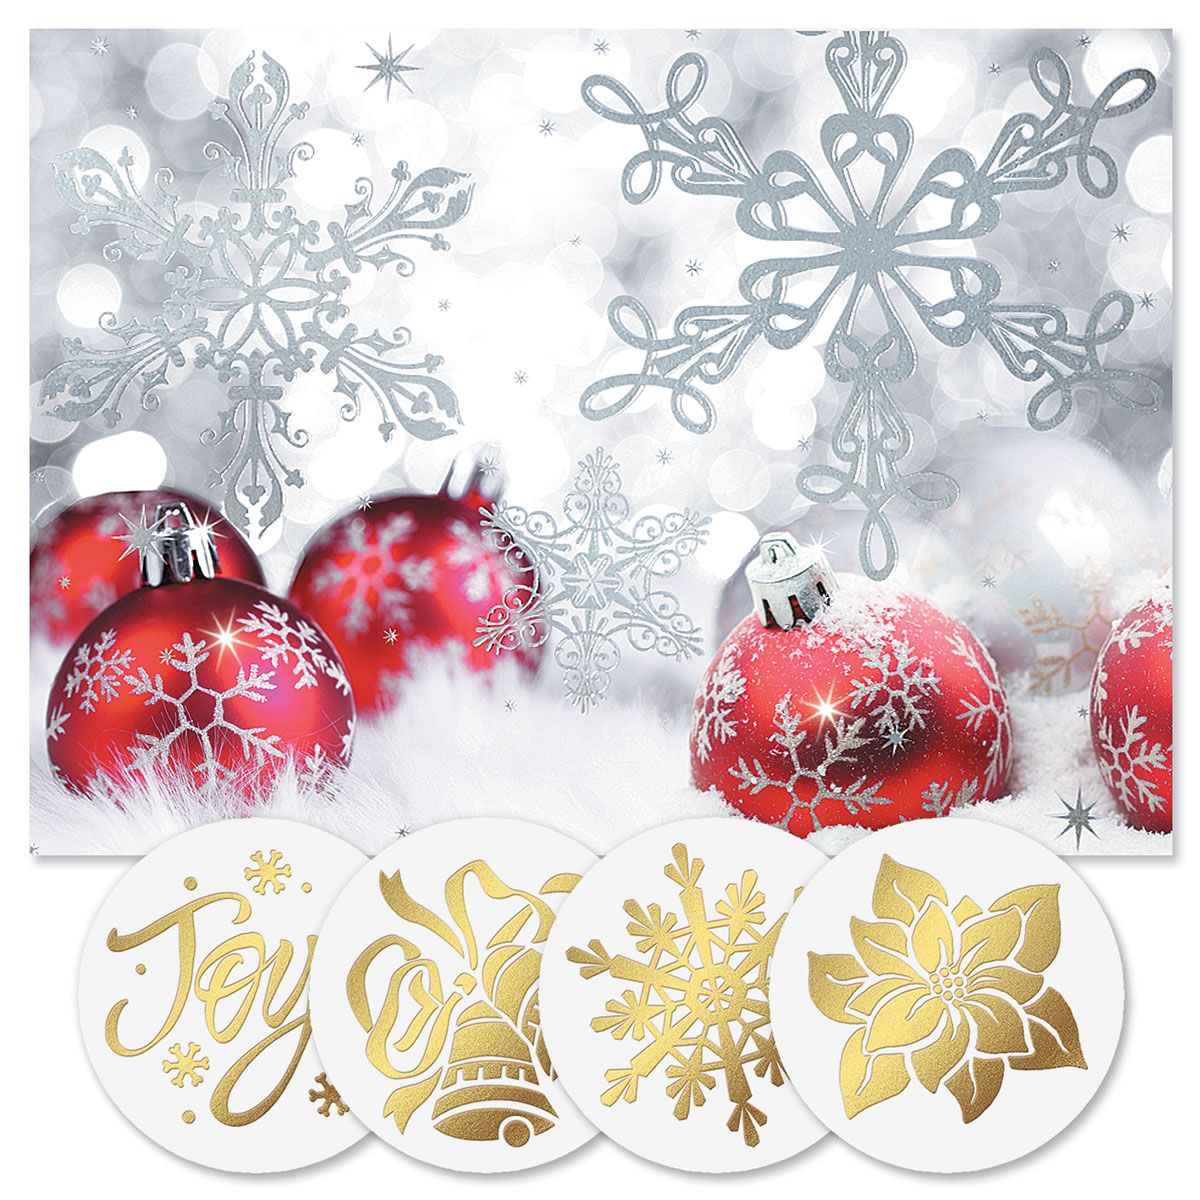 Silver Shimmer Foil Christmas Cards - Nonpersonalized